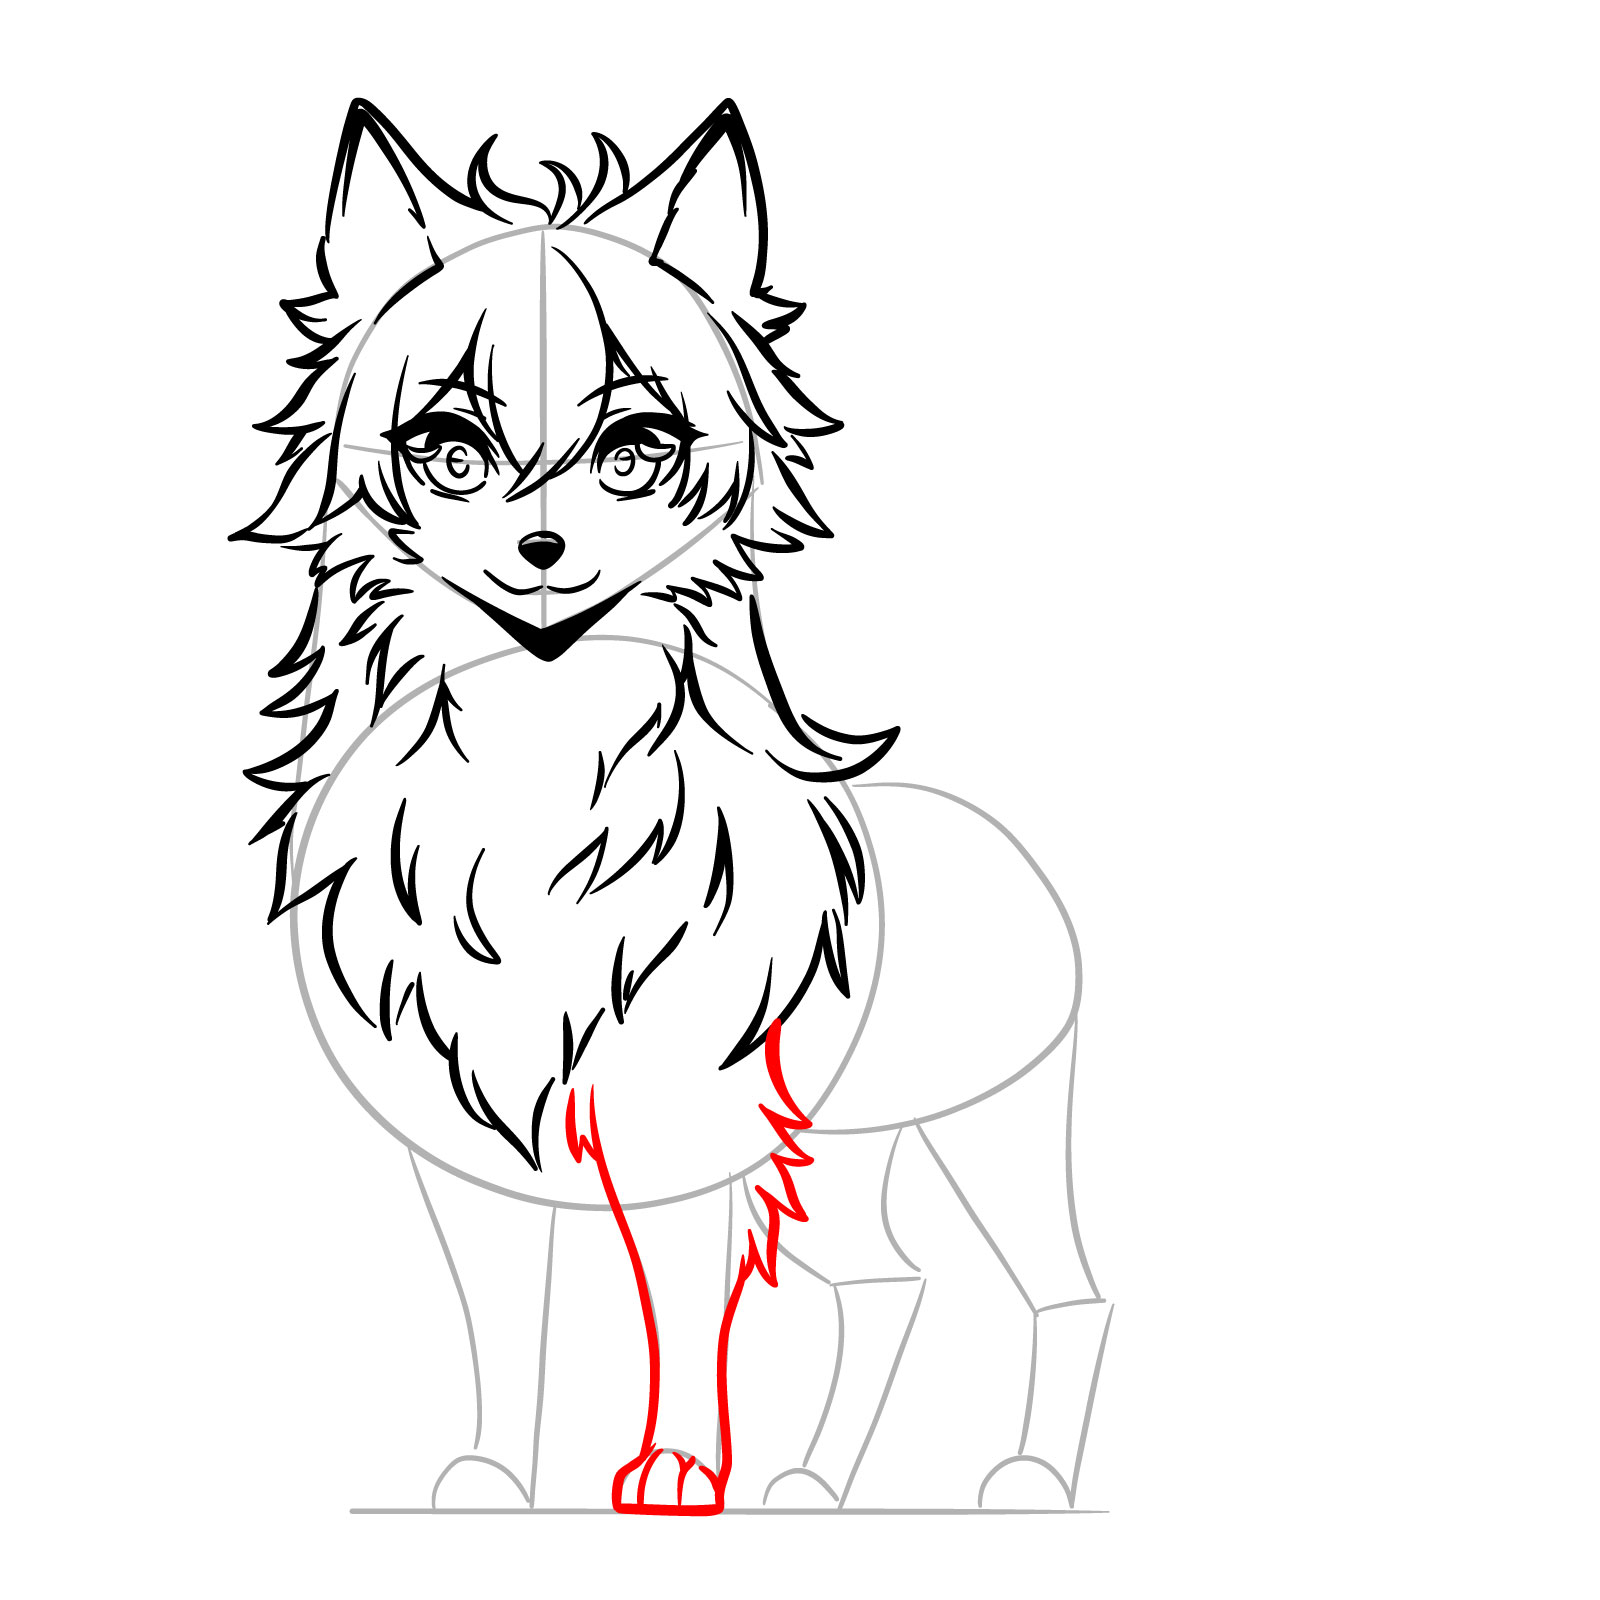 Initial outline of anime wolf's front leg in drawing - step 12